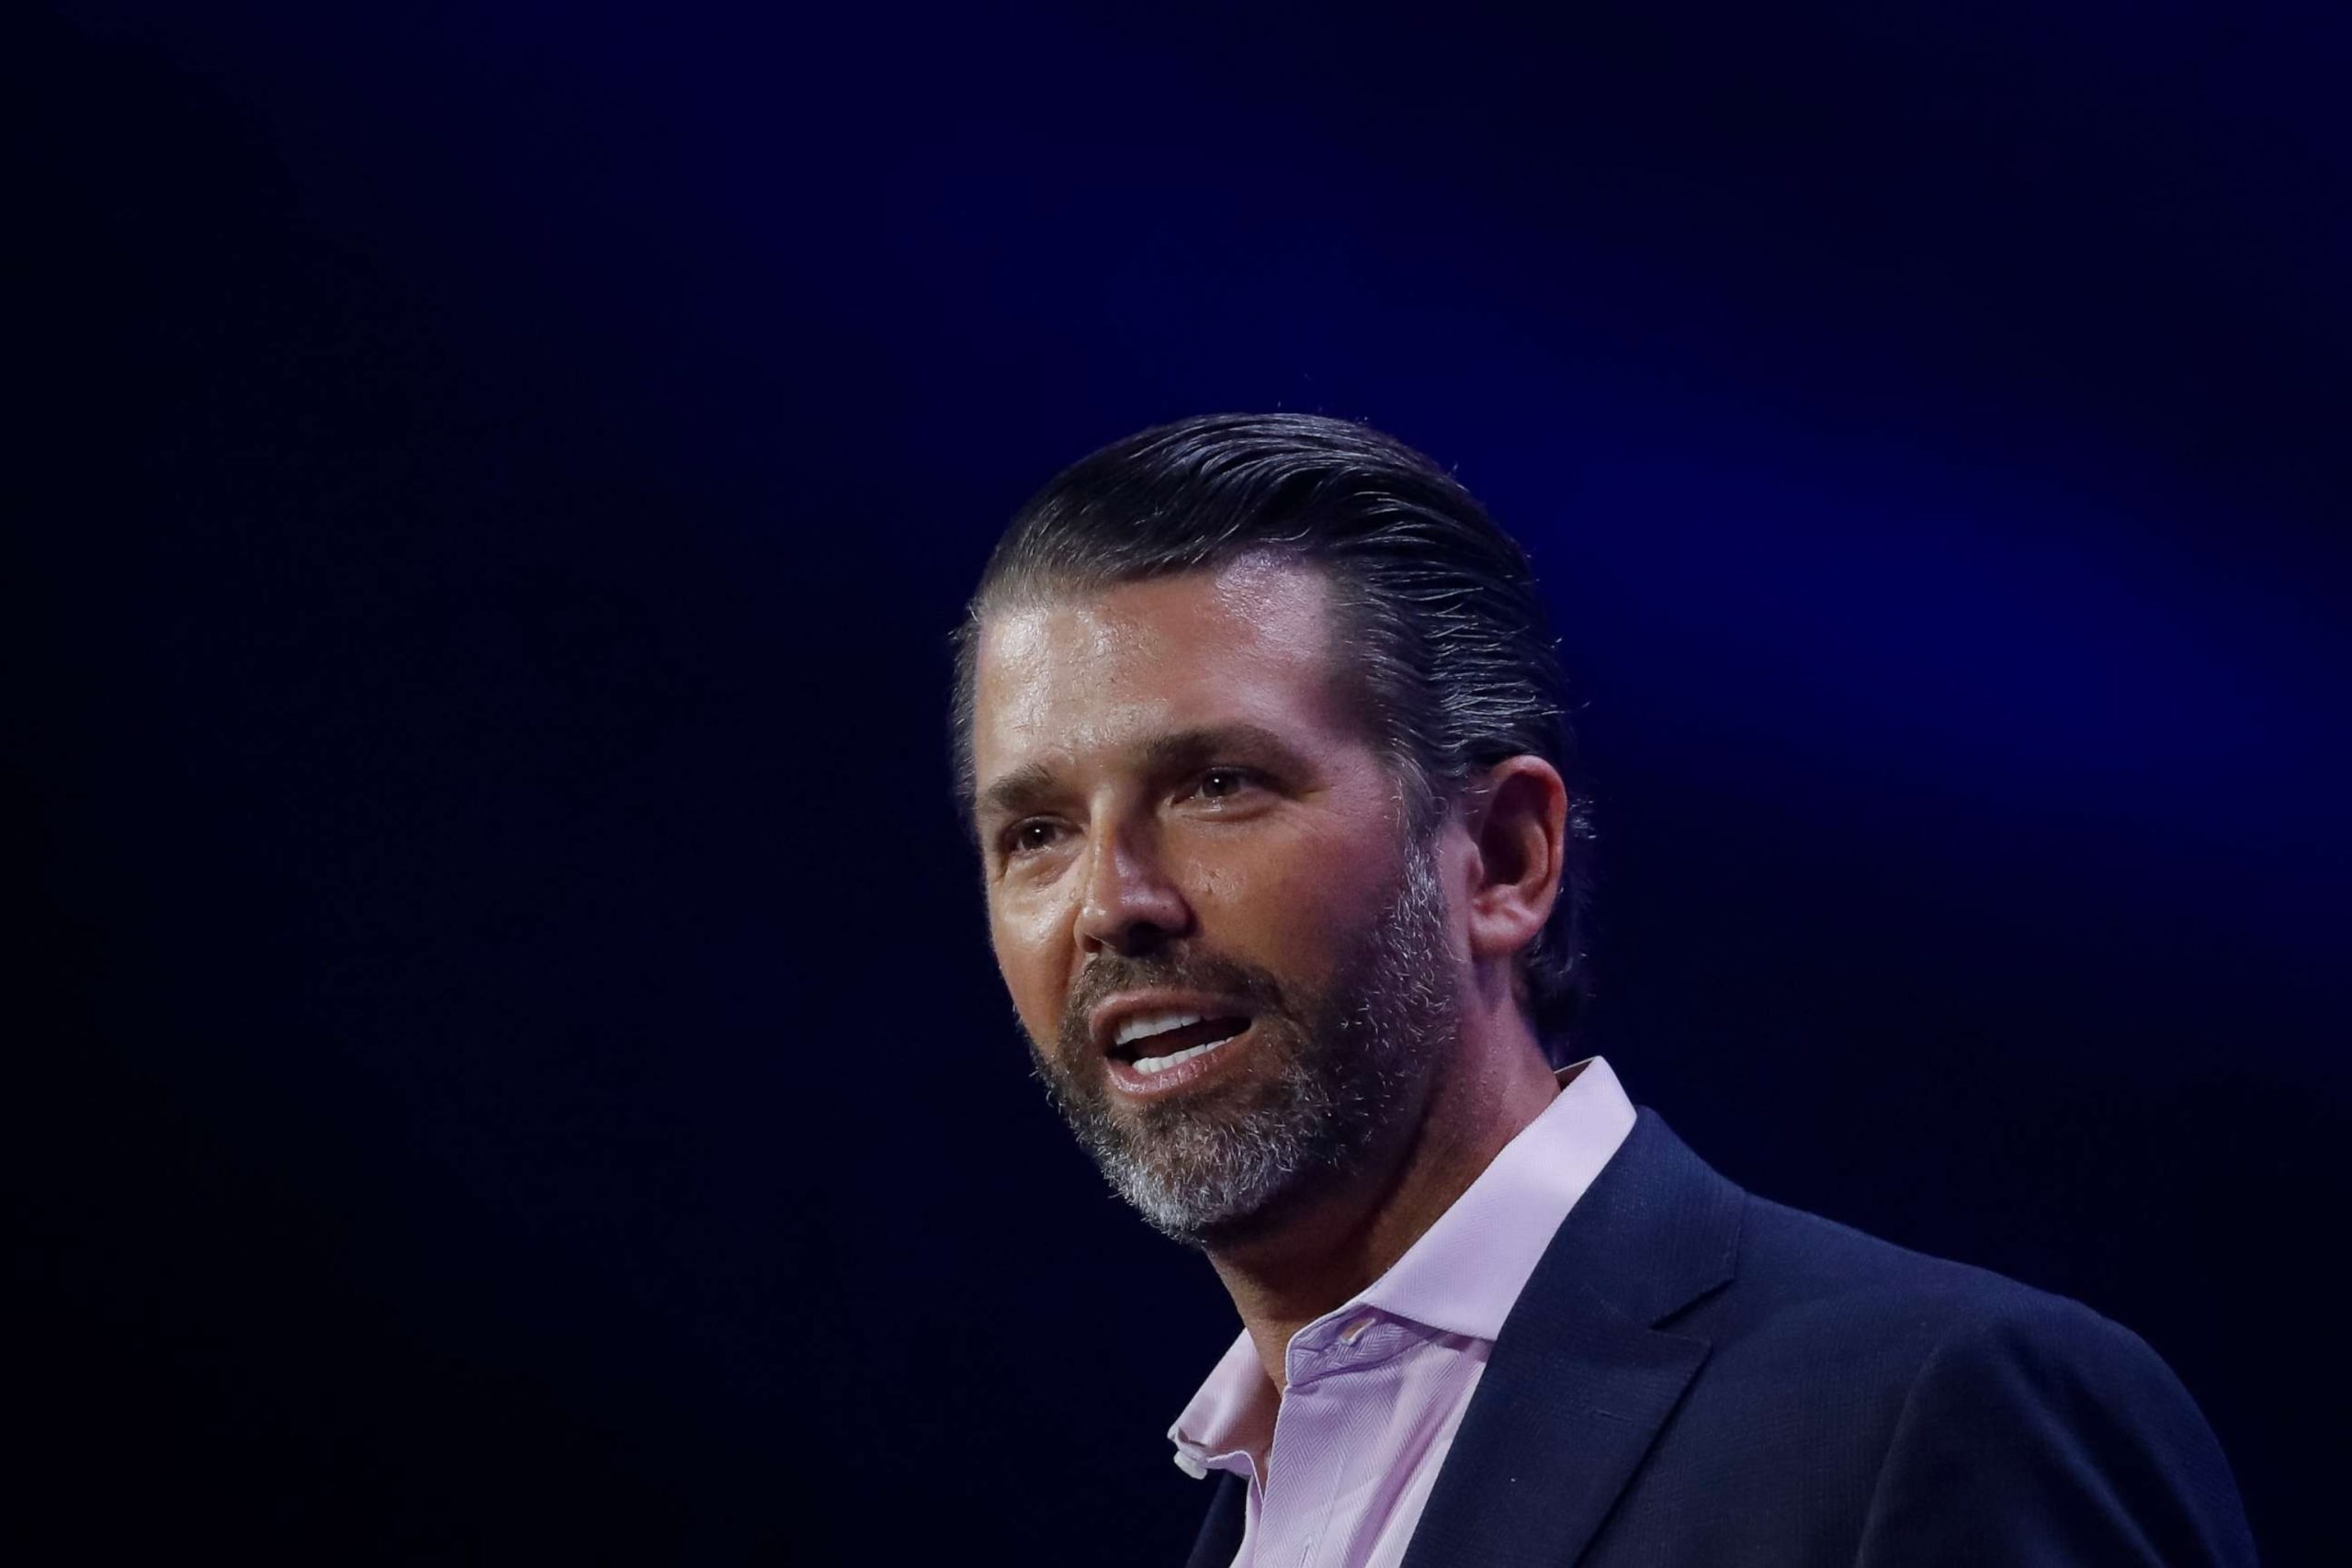 Donald Trump Jr. scheduled to provide testimony in the Trump Organization's $250 million fraud trial